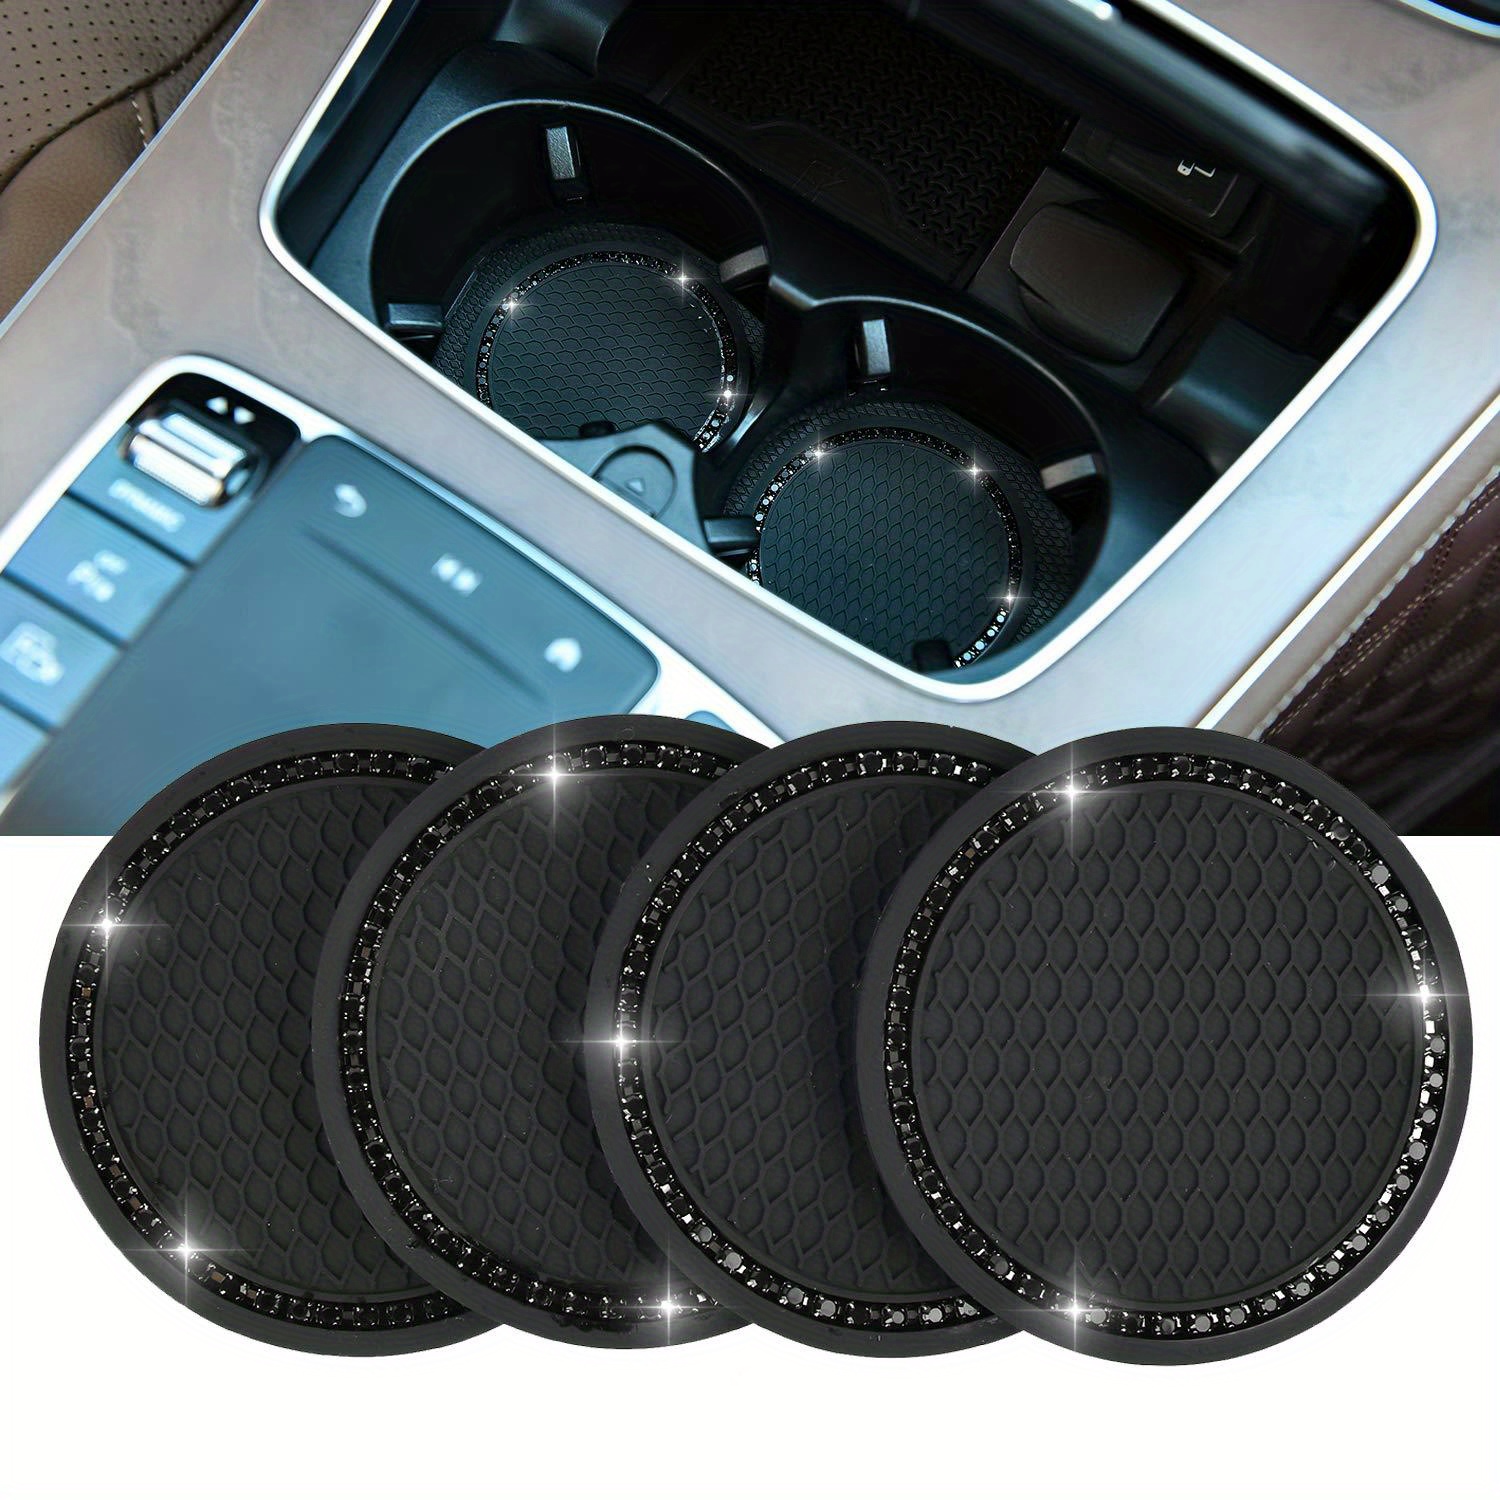 Car Coasters For Cup Holders, Car Bling Coasters, Silicone Car Cup